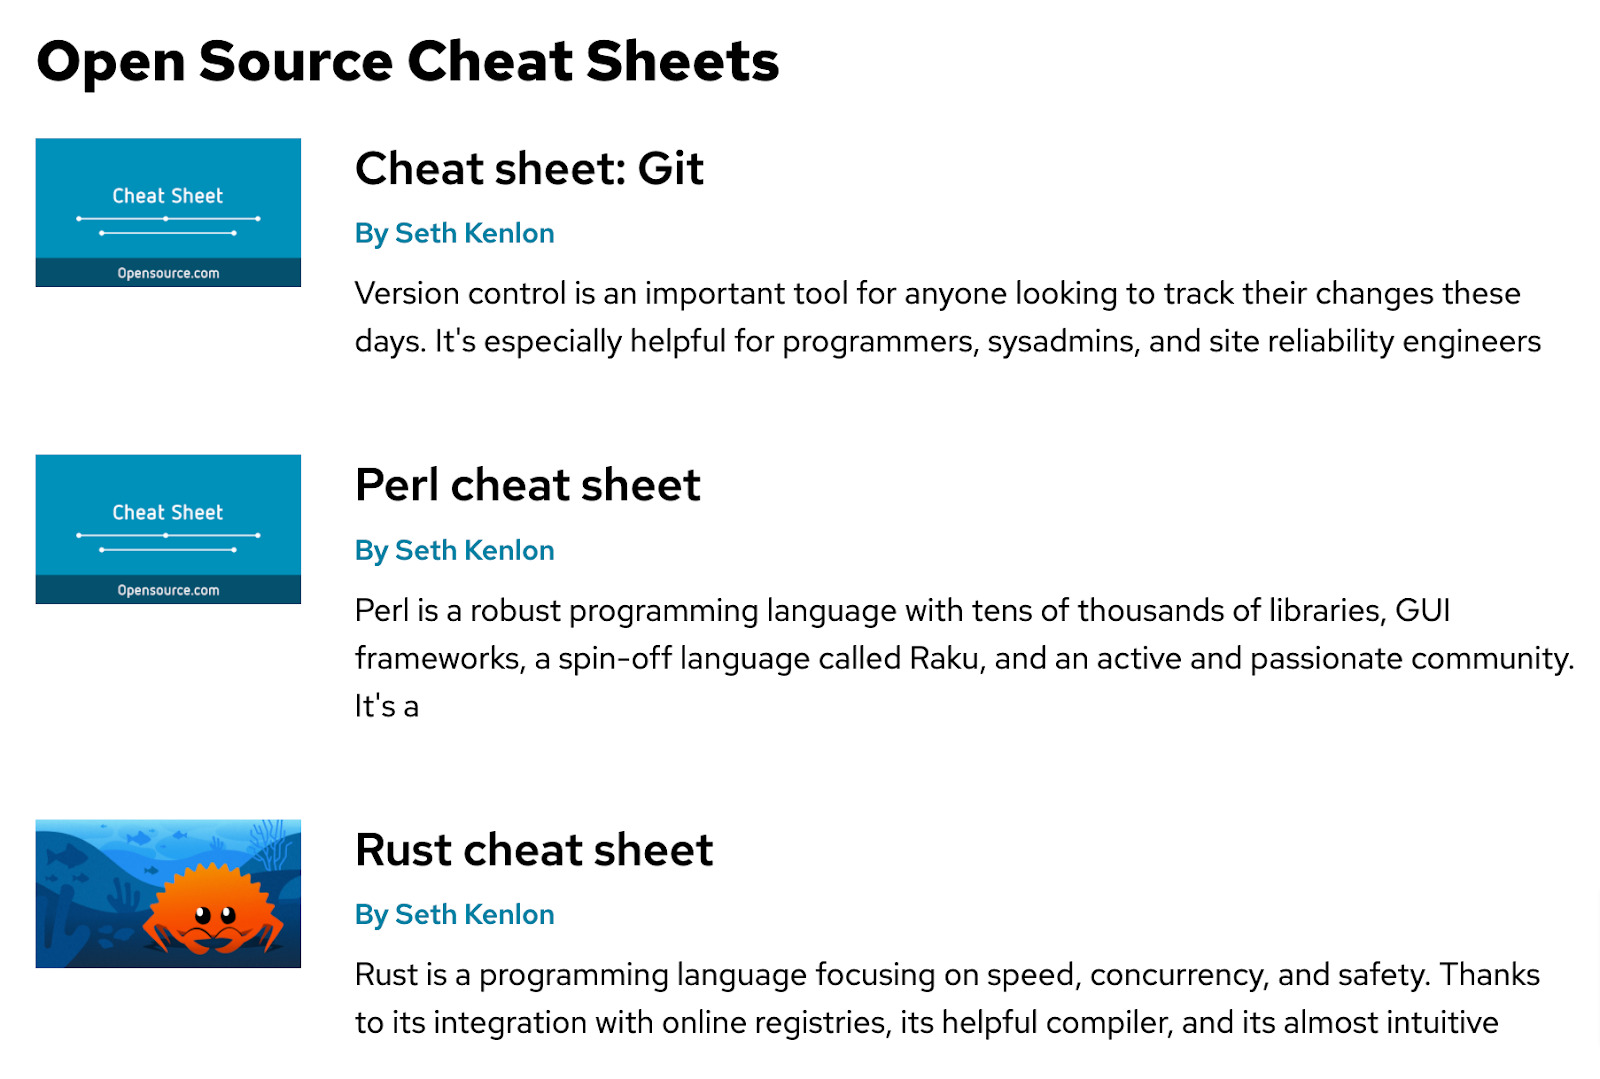 List of cheat sheets with a summary next to each sheet